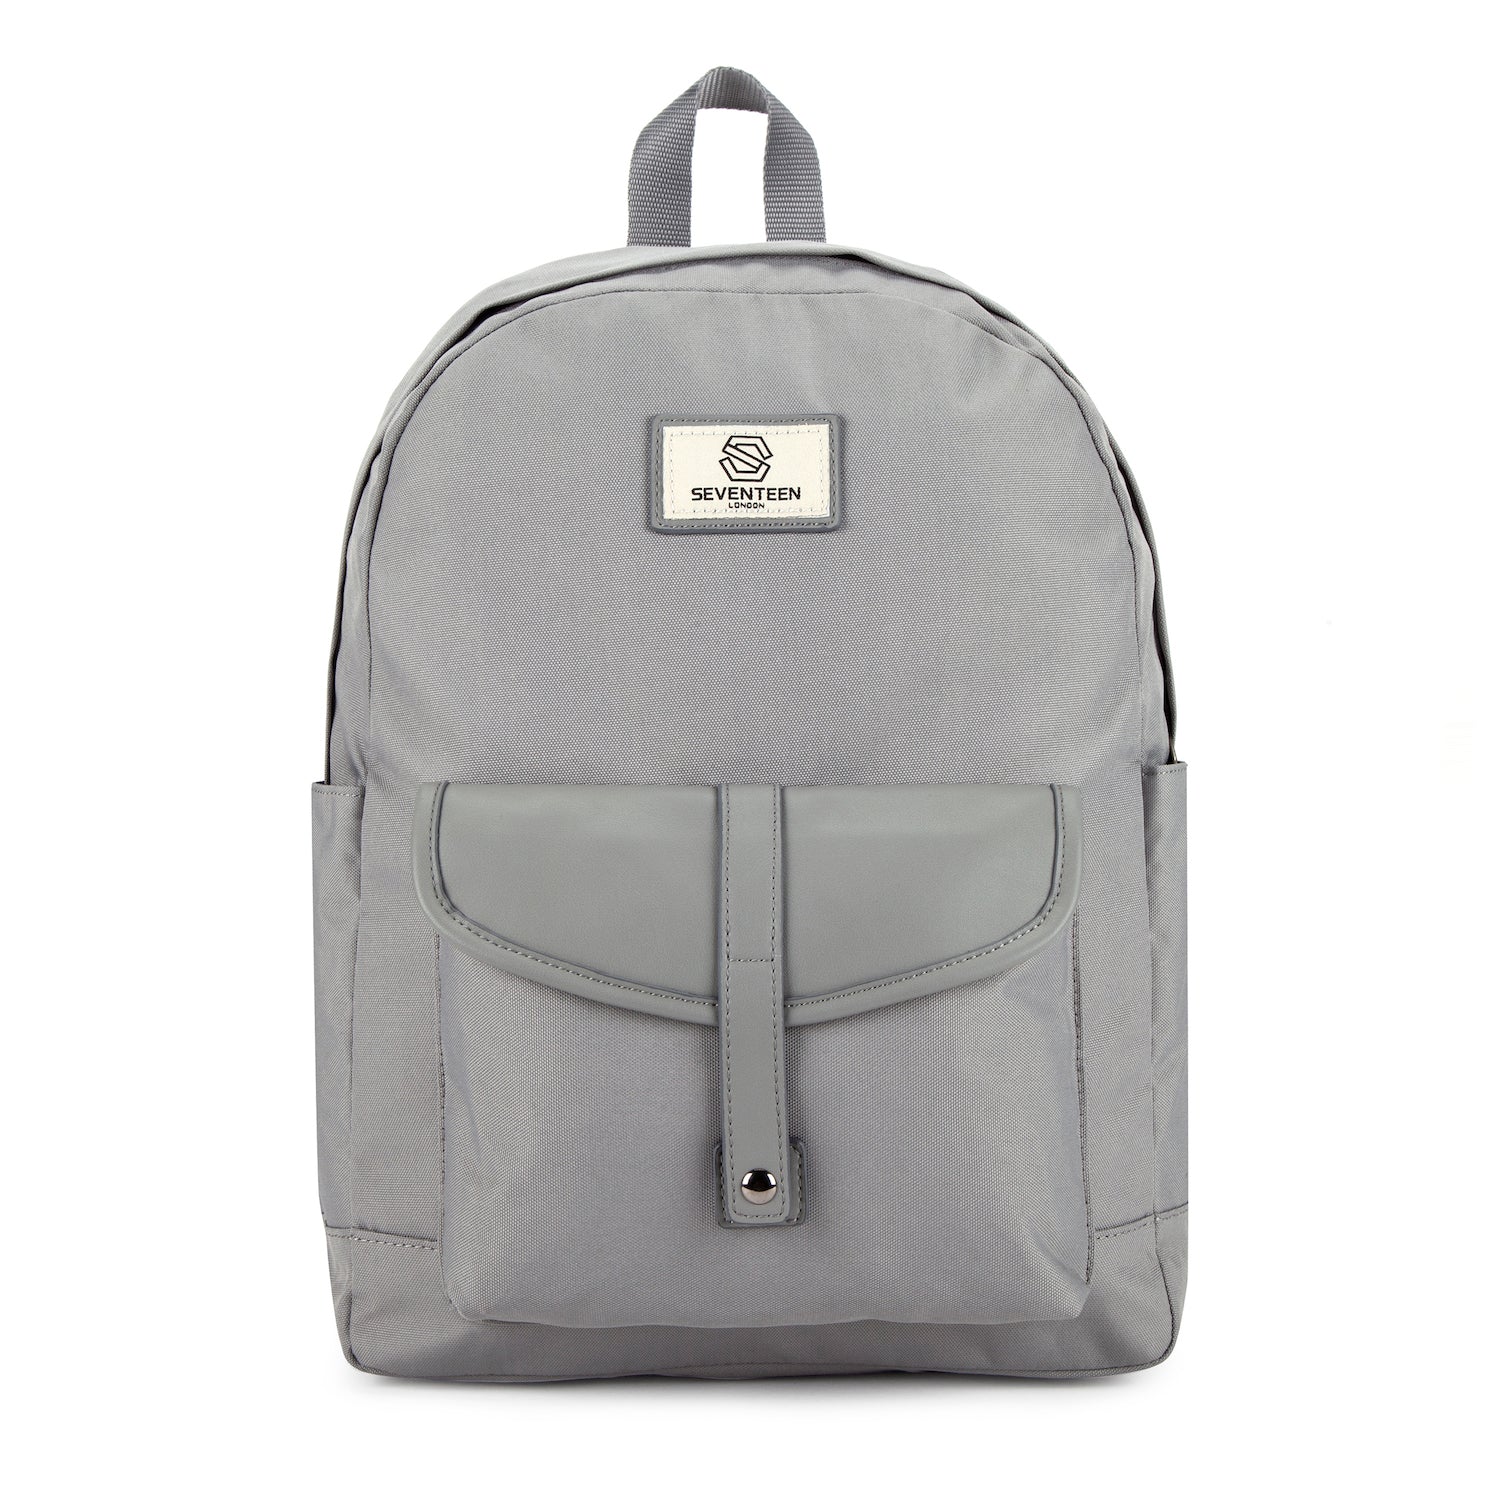 Notting Hill Backpack - Grey